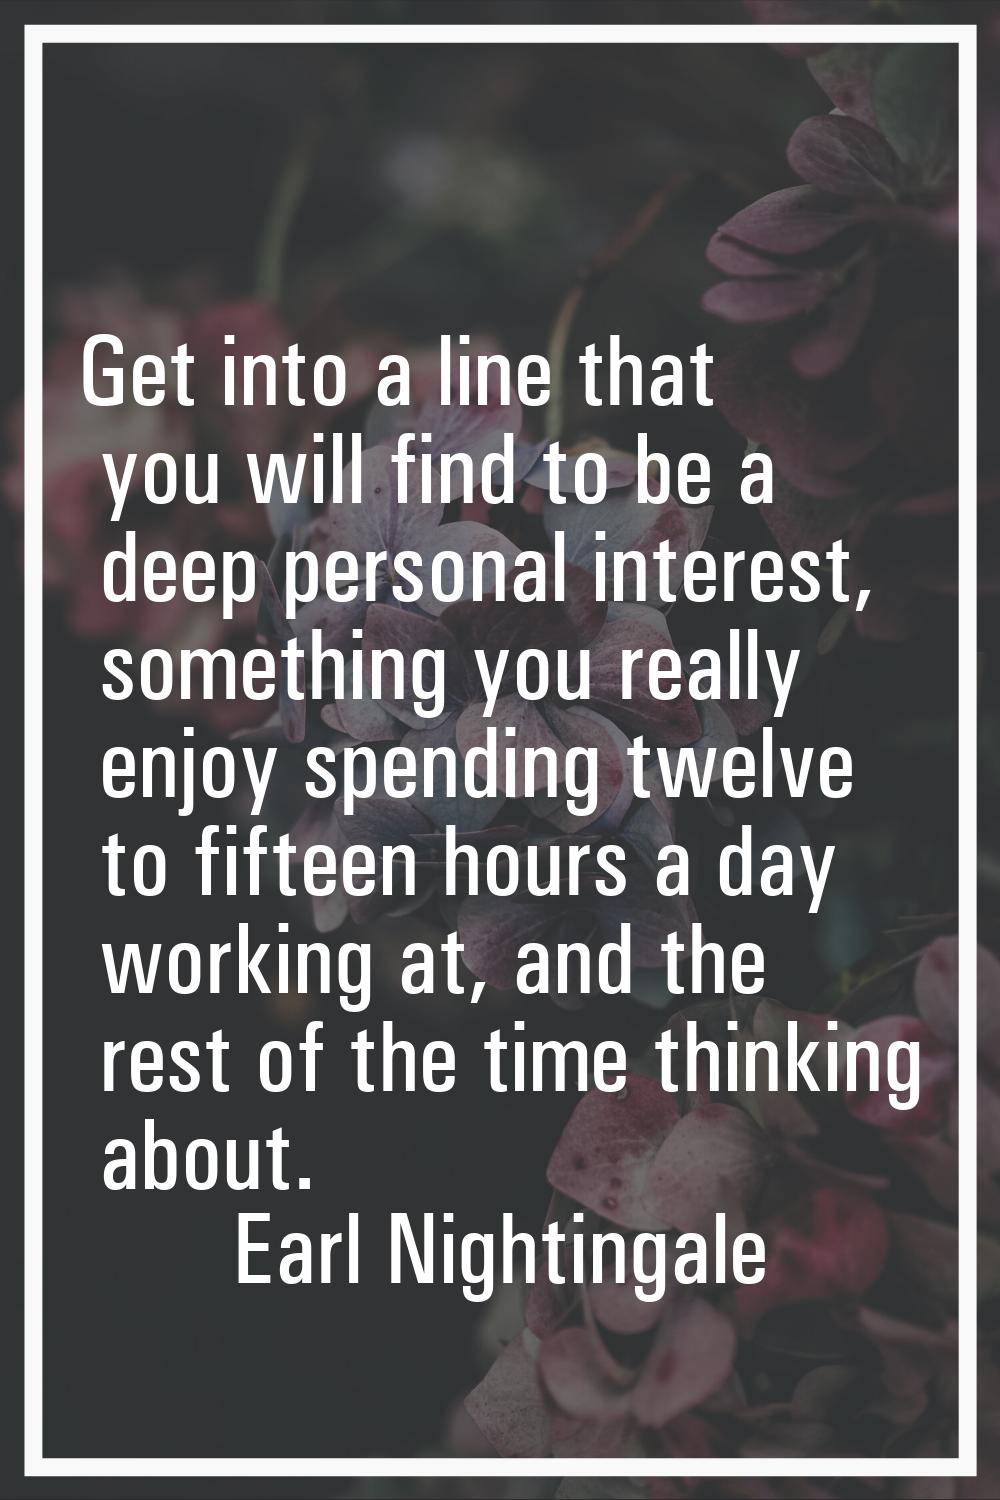 Get into a line that you will find to be a deep personal interest, something you really enjoy spend